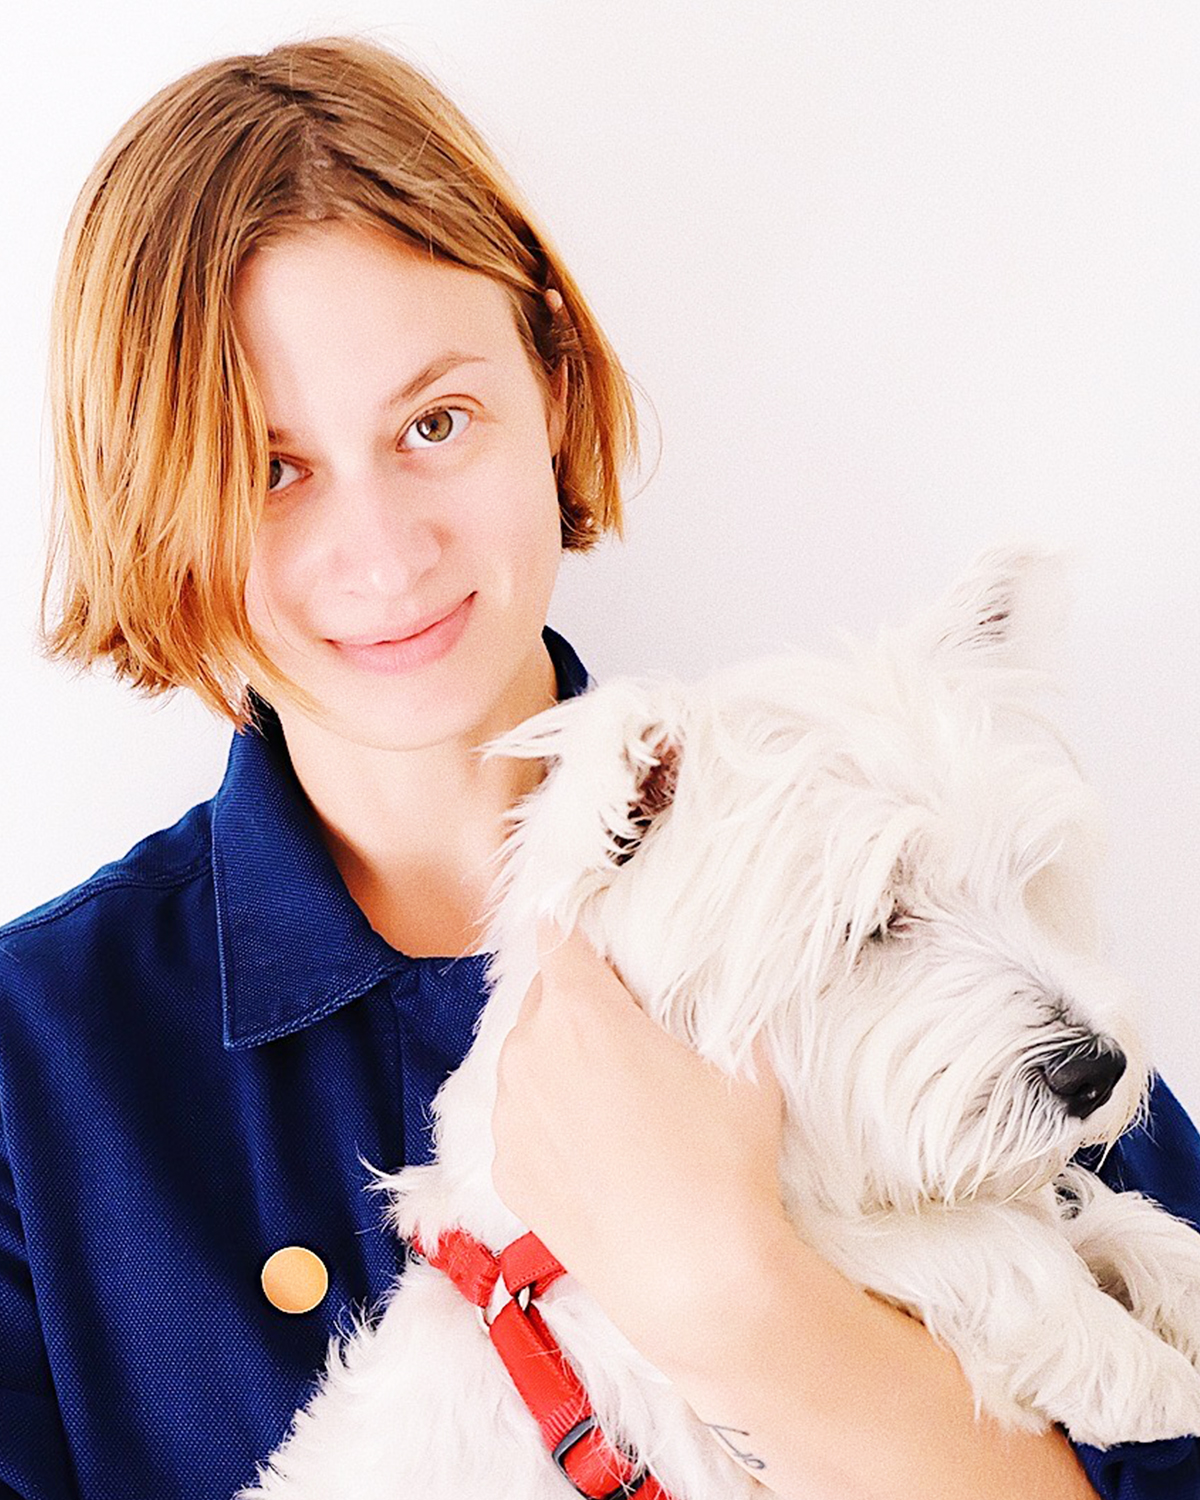 2019, Ekaterina and her dog. 